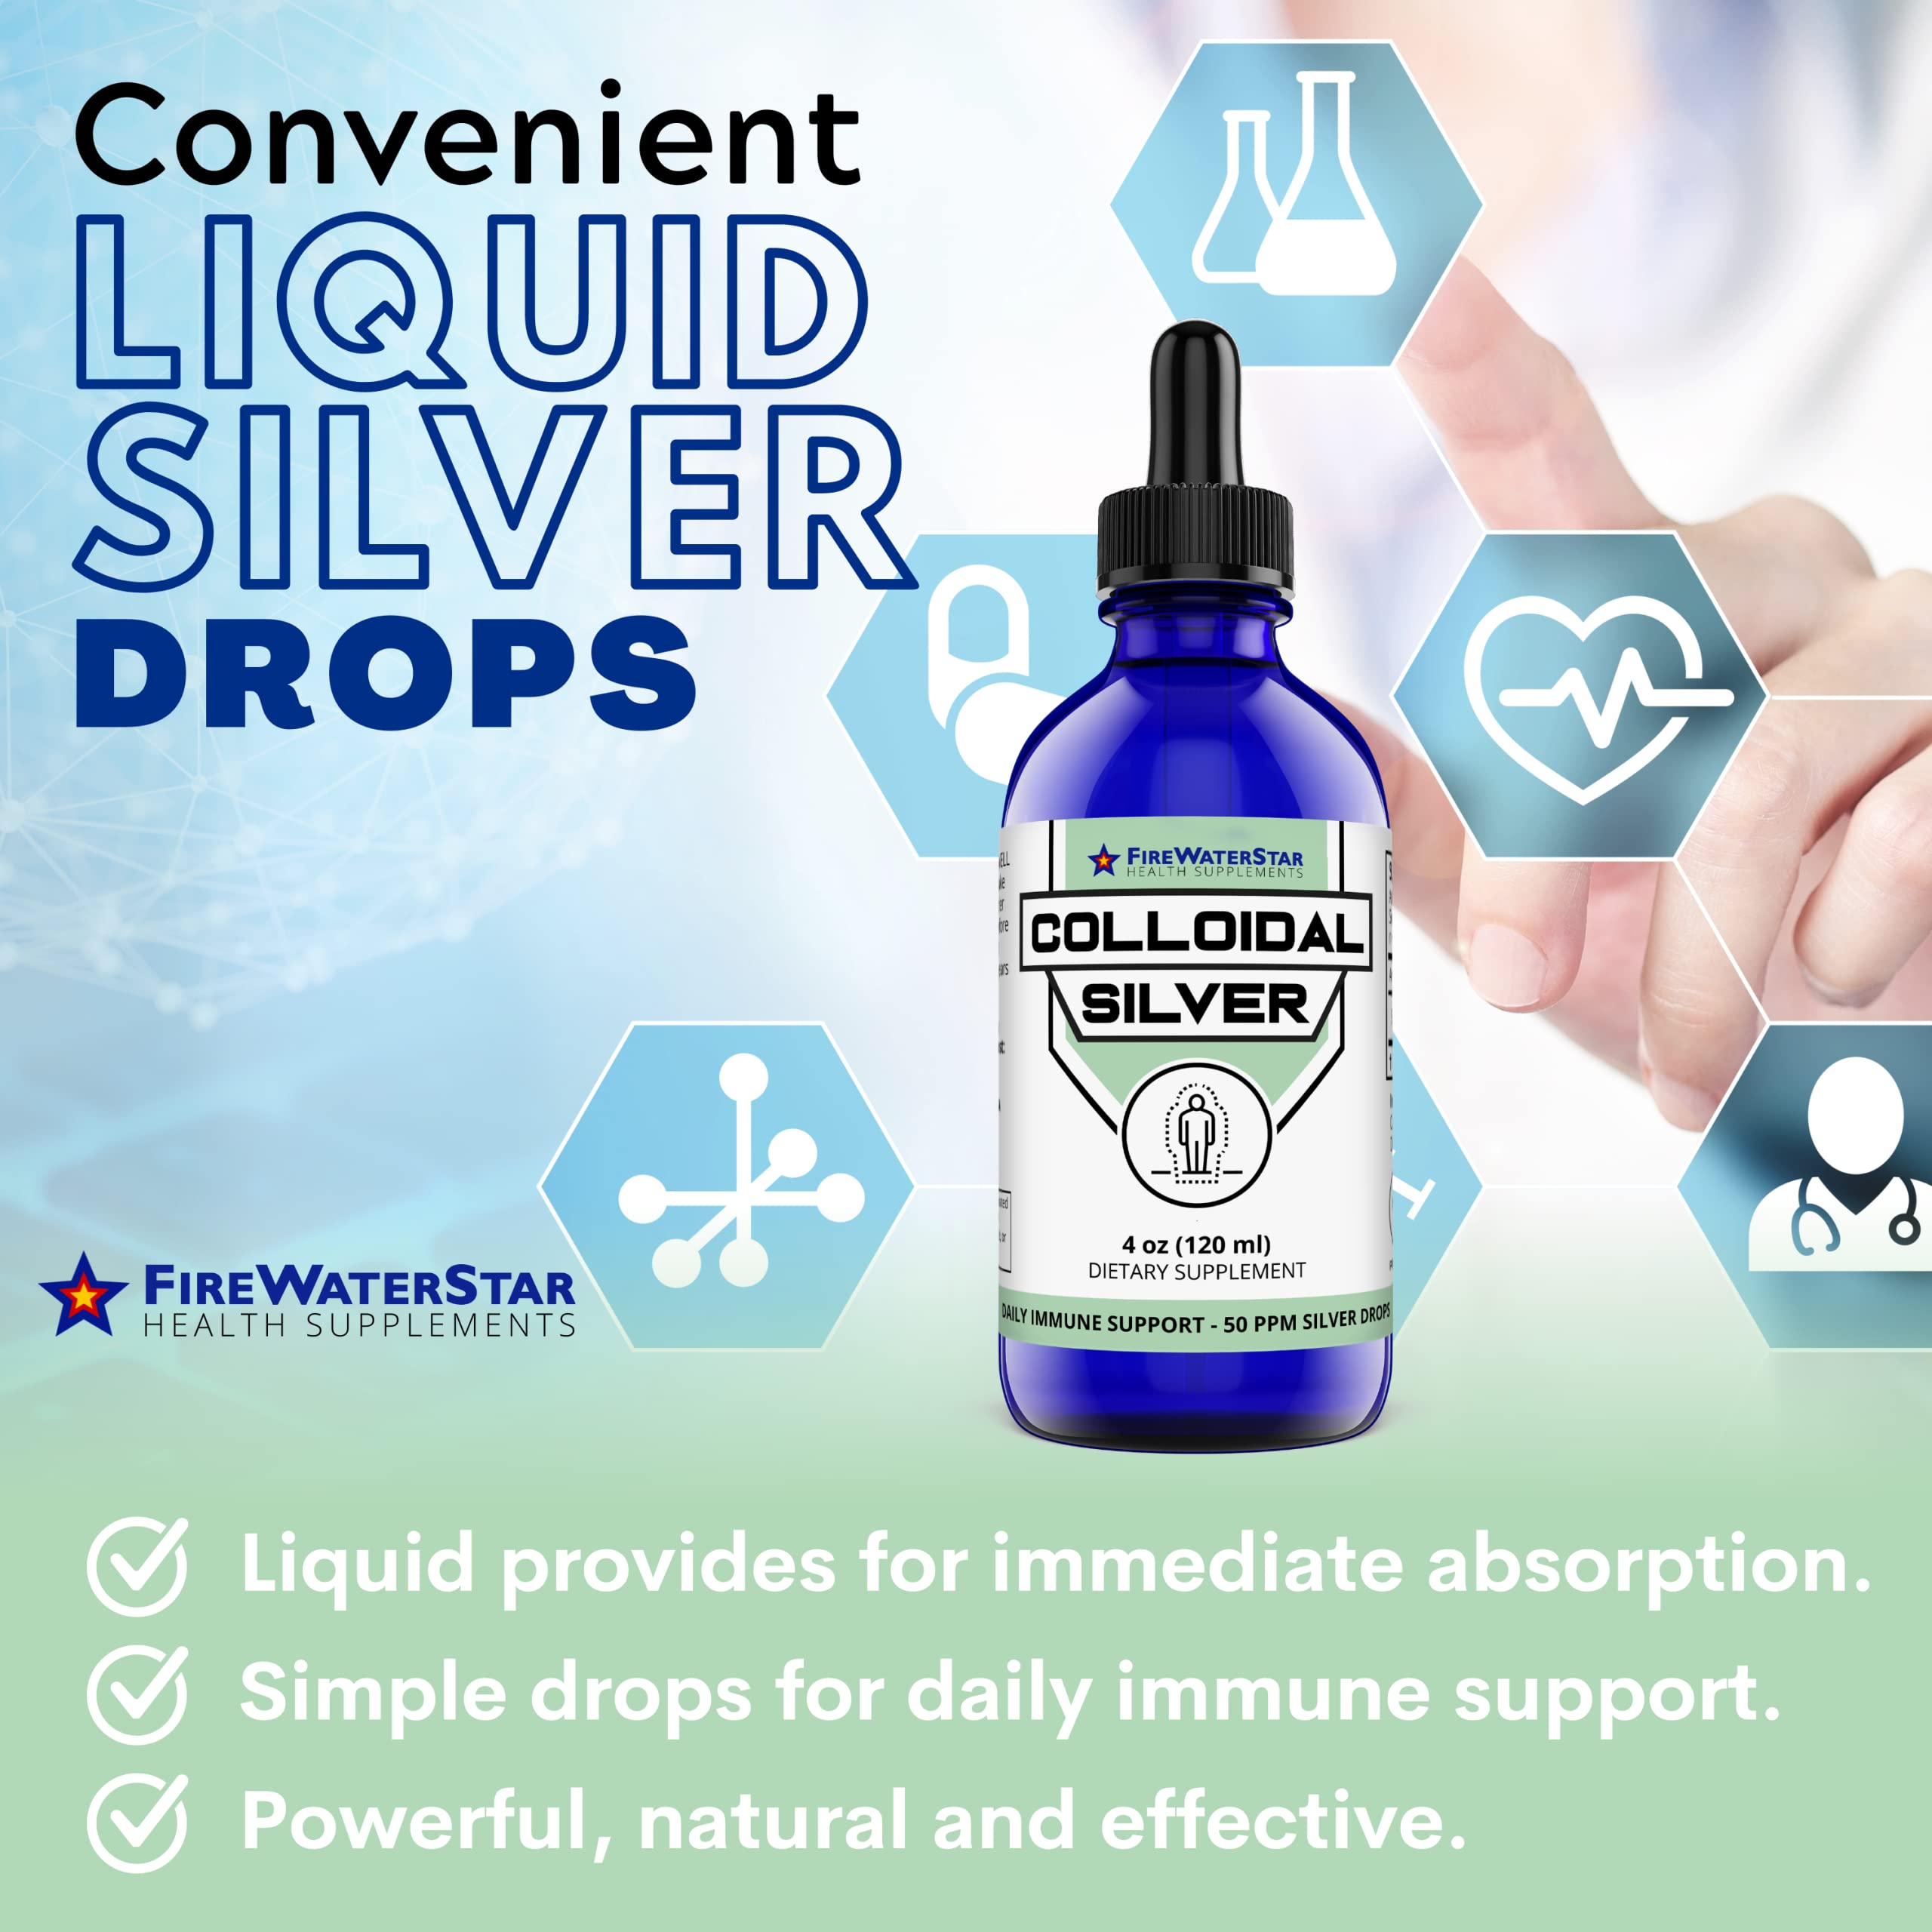 Colloidal Silver + Colloidal Silver Nasal Spray - 2oz - Ultra Fine Silver Mist - 50 ppm - 99.99% Purity - Sinus Relief - Helps with Dry, Irritated, Stuffy Nose - Immune System Support